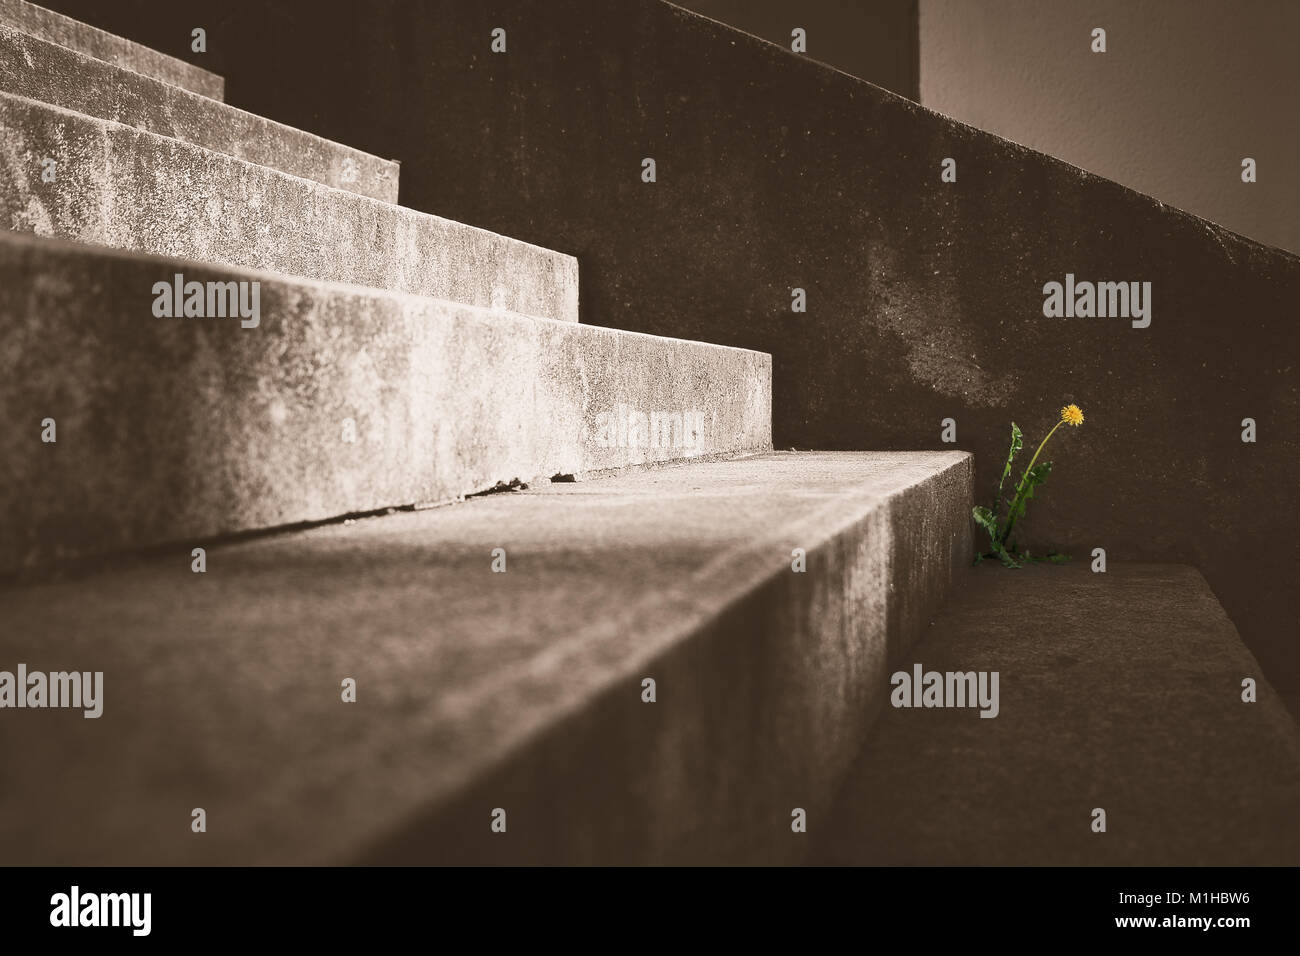 The artificial picture of a single lonely dandelion on the concrete stairs. The flower is isolated in the picture. Stock Photo